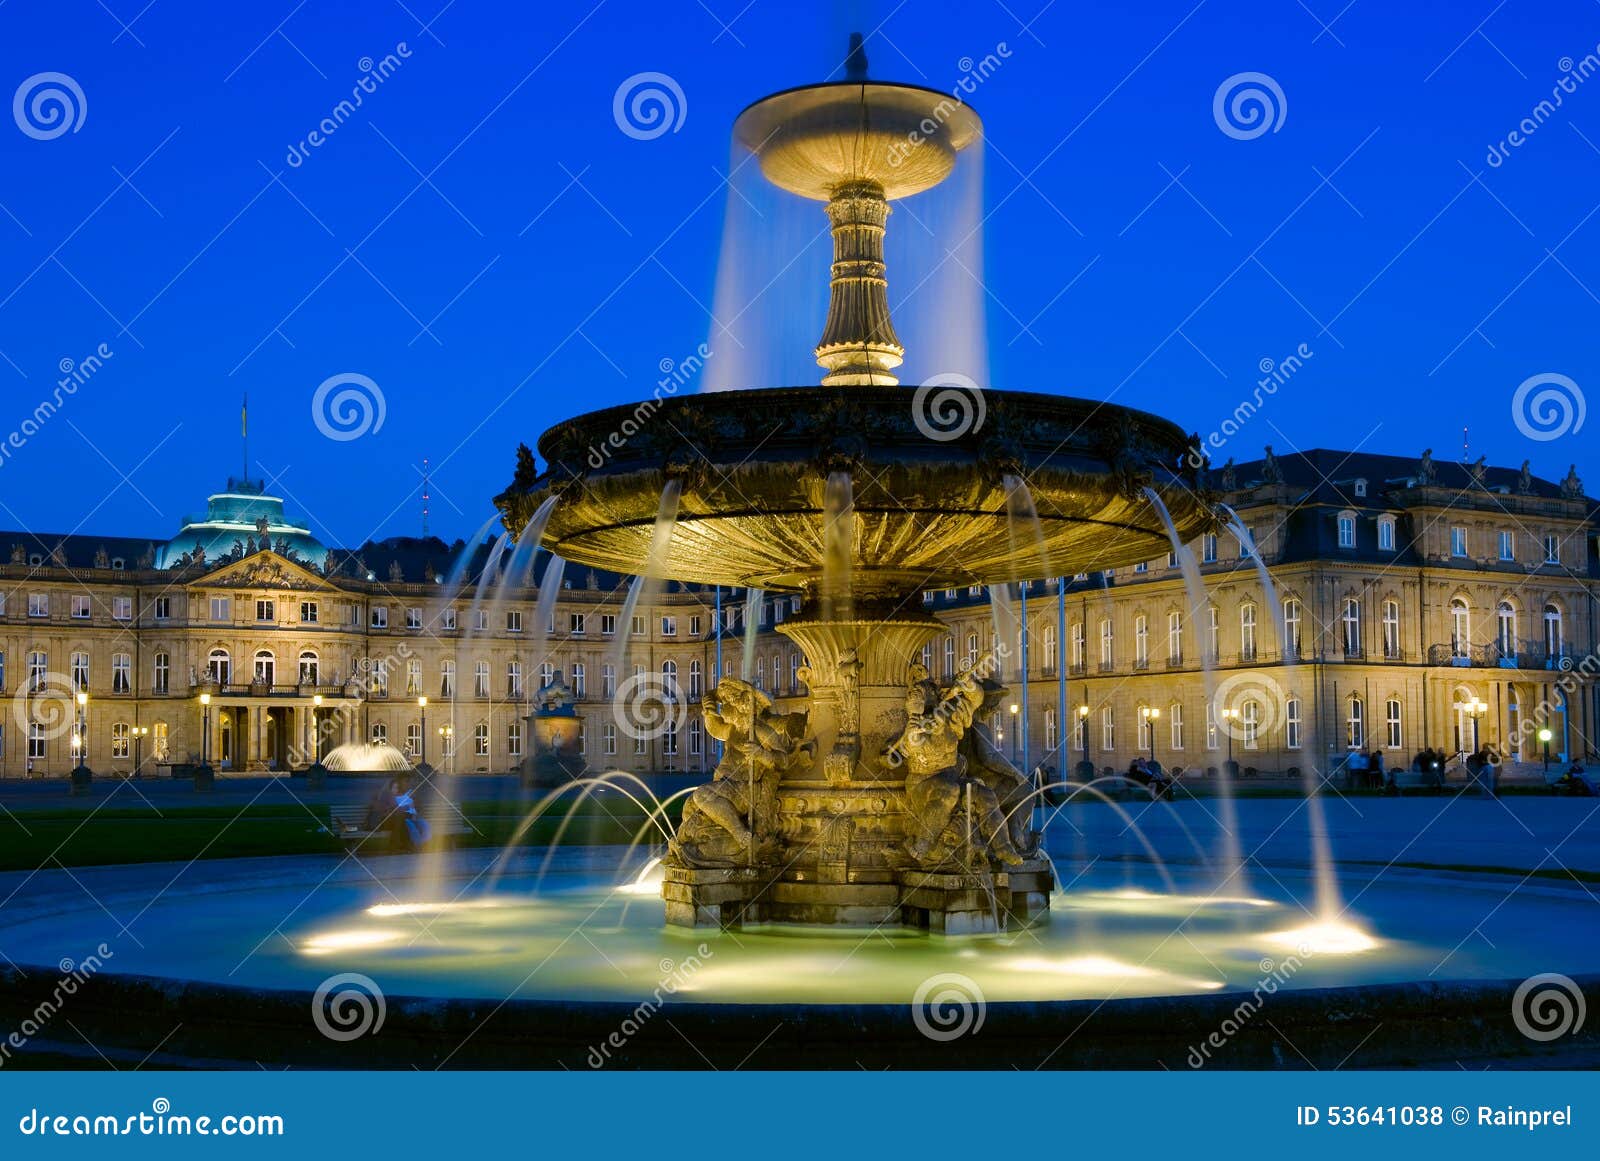 Schlossplatz Fountain in Stuttgart, Germany. Schlossplatz is the largest square in the centre of the city of Stuttgart and home to the New Castle which was built between 1746 and 1807. Schlossplatz stands next to two other popular squares in Stuttgart: Karlspatz to the south and Schillerplatz to the south west.n